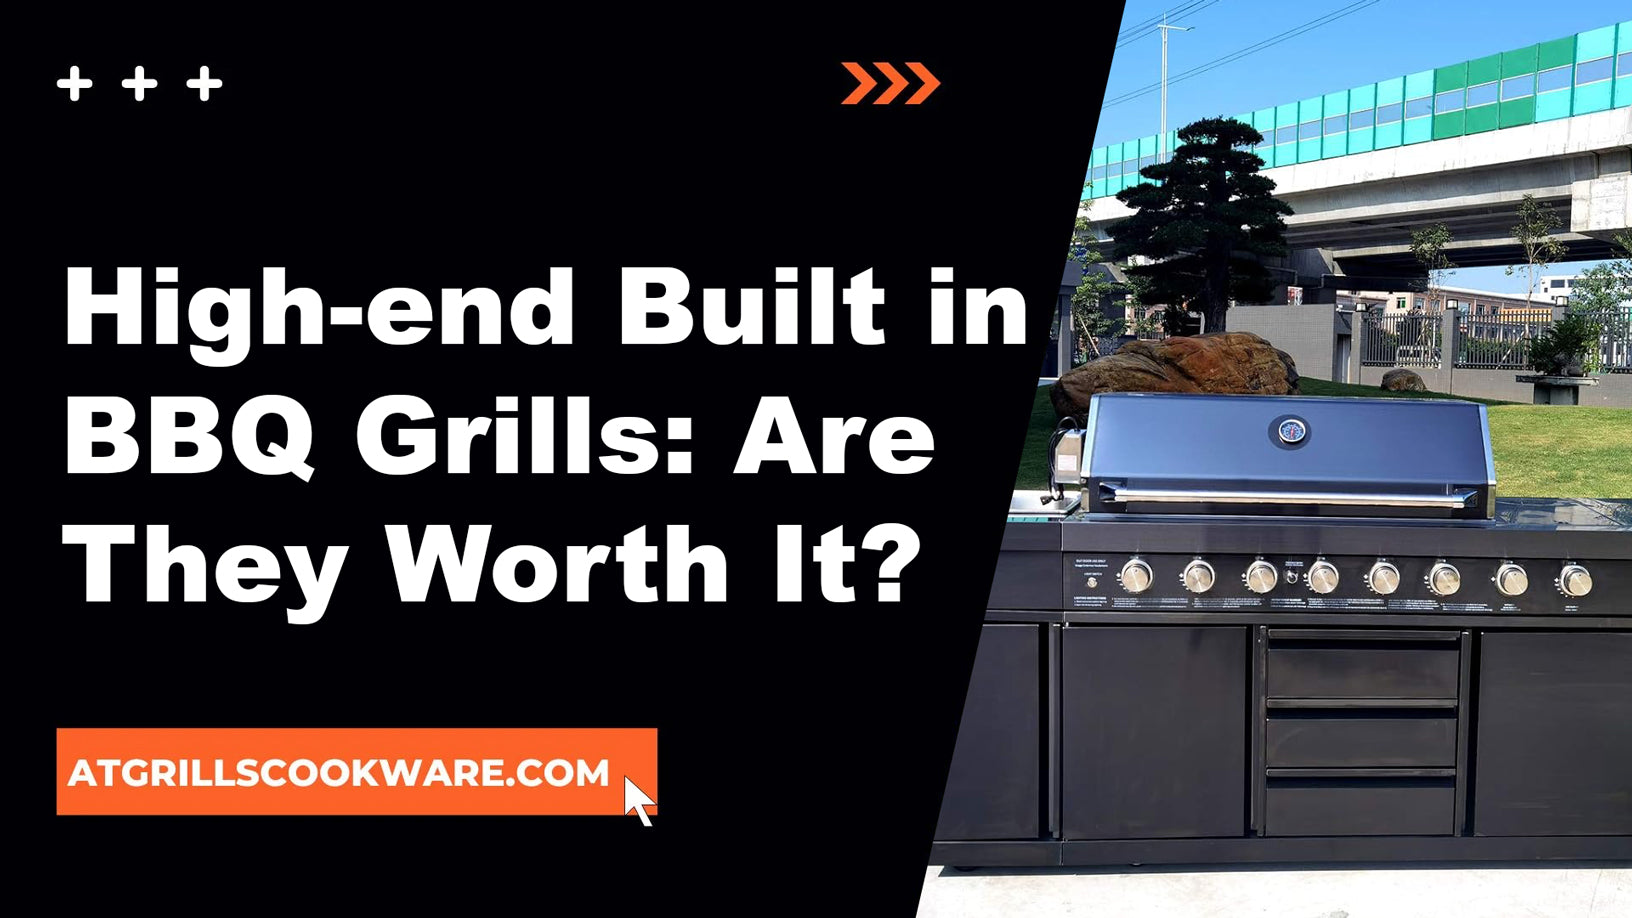 High-end Built-in BBQ Grills: Are They Worth It?